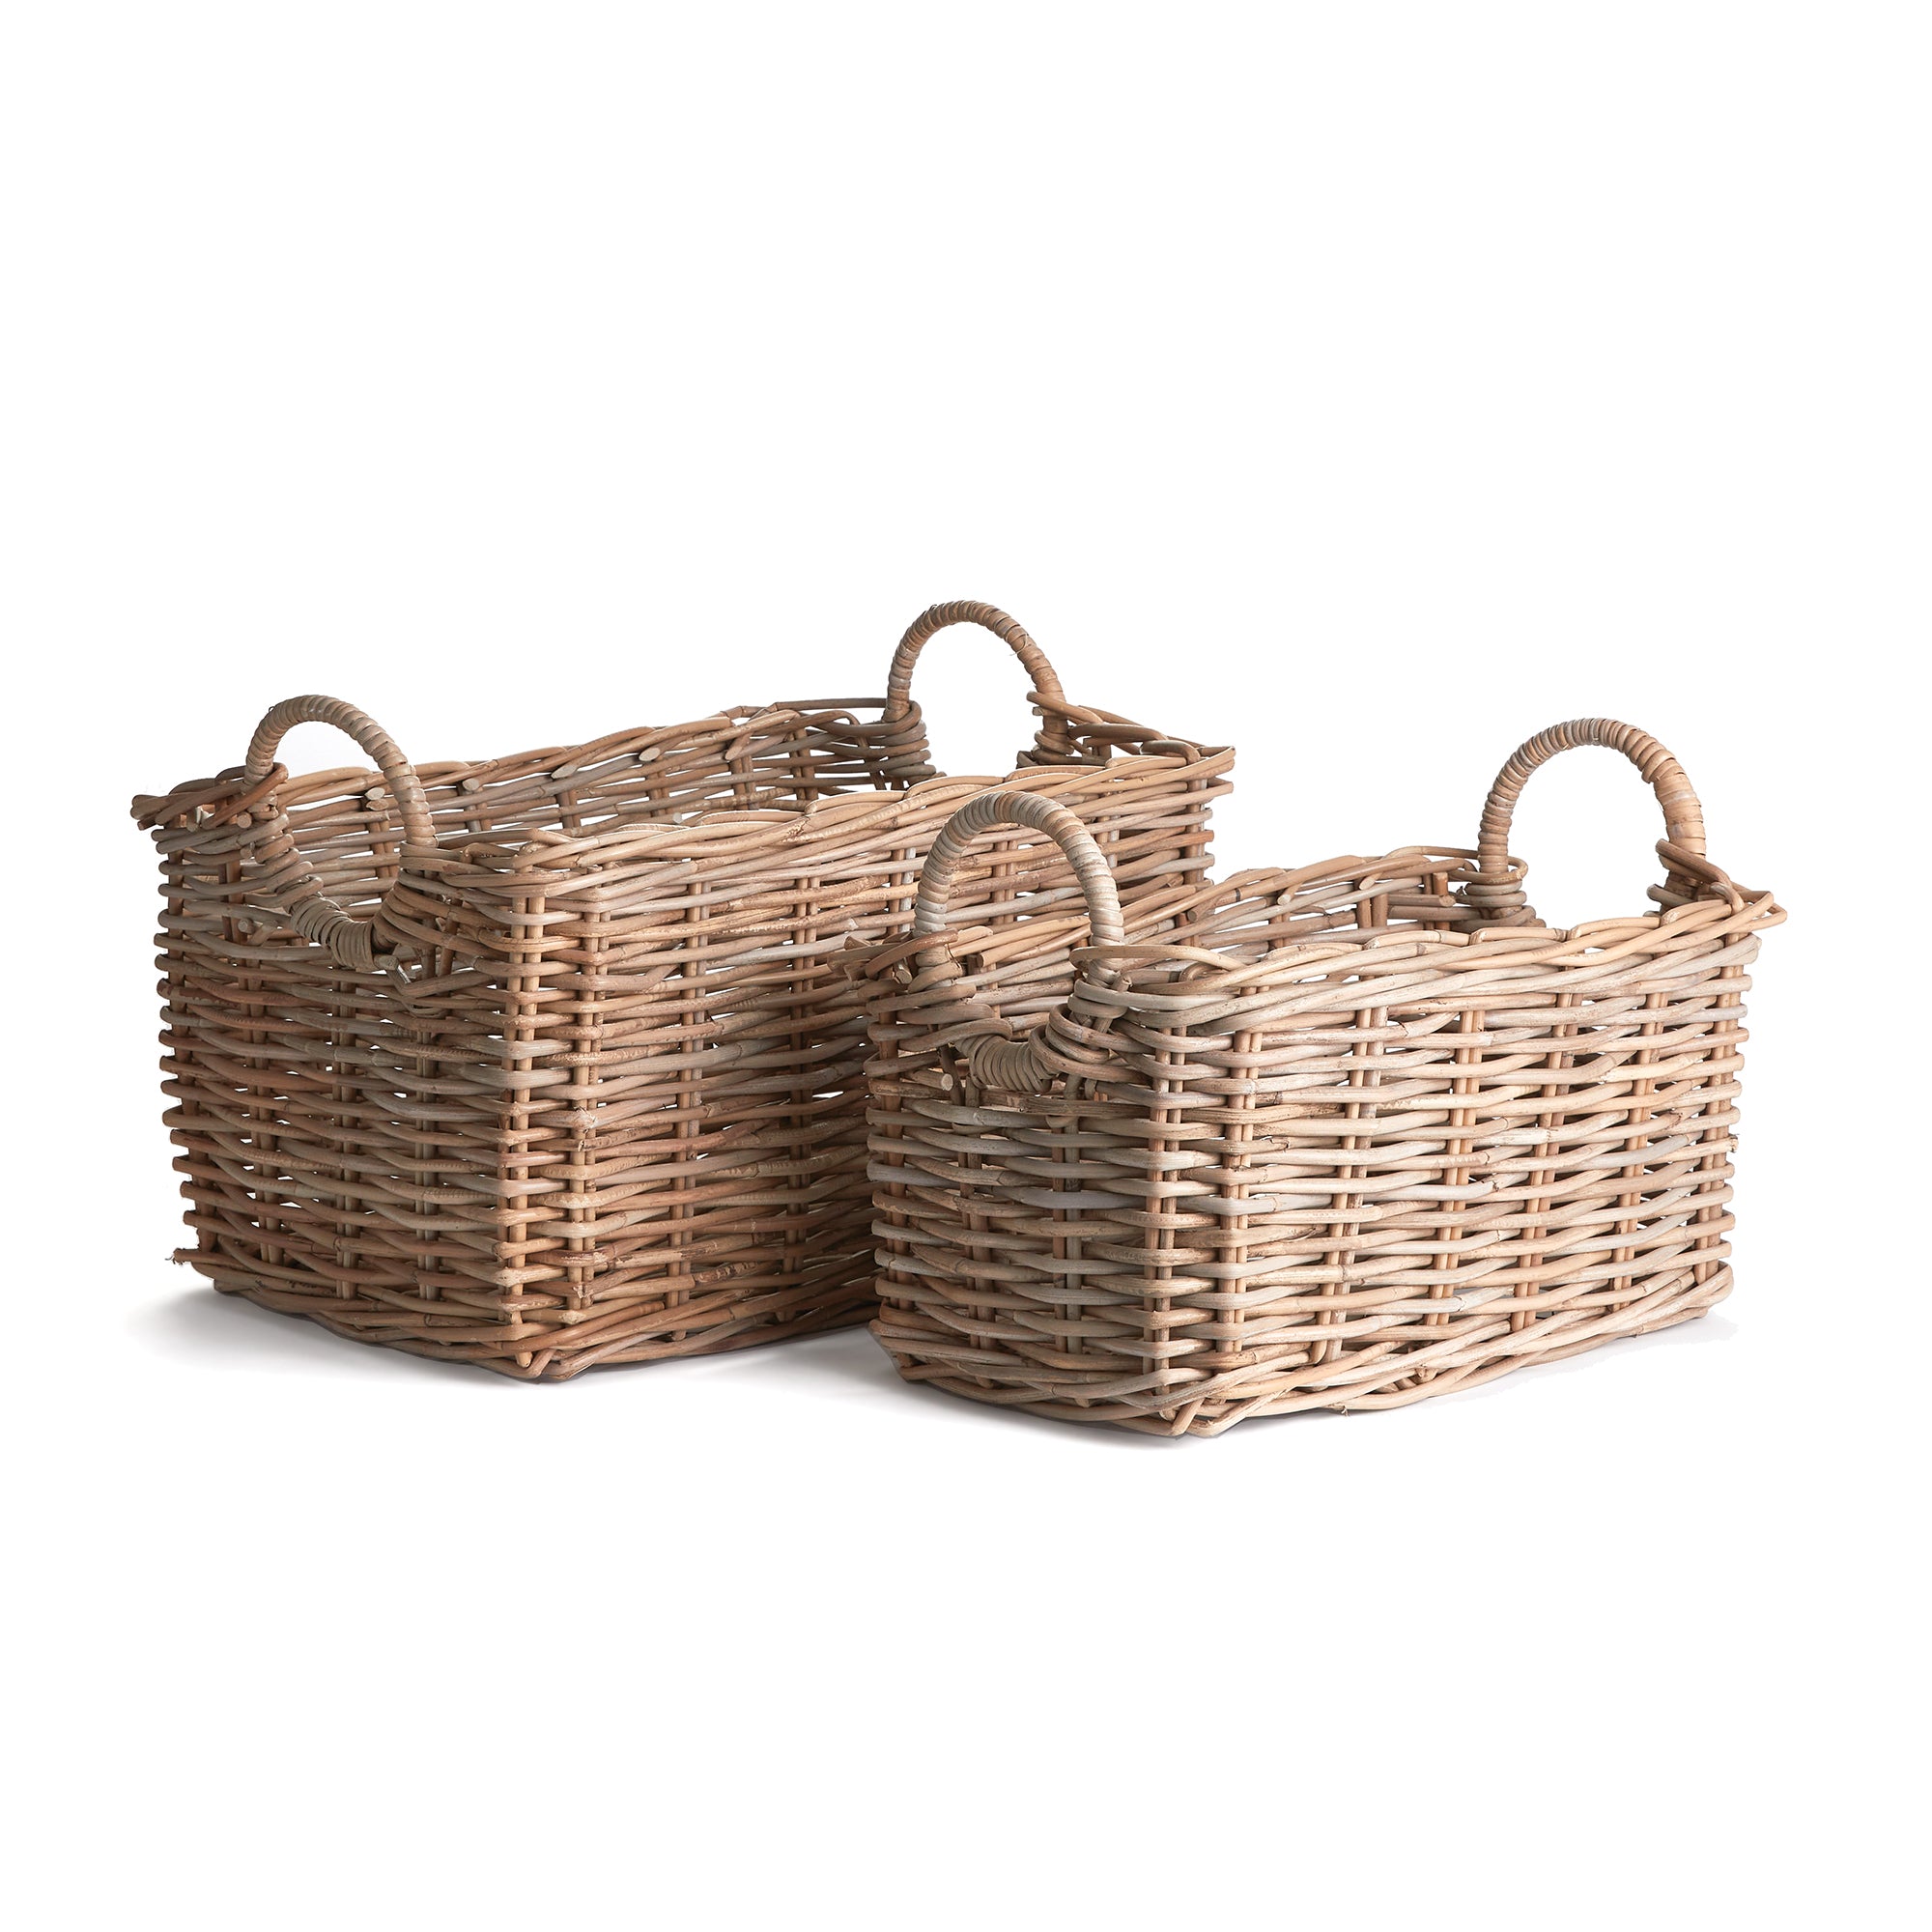 When it comes to the classic, casual appeal of rattan, these baskets are some of the best. The Halo is the cut out design of the handles that creates a unique circular detail. They make a great set of laundry baskets or any thing you need stored beautifully. Amethyst Home provides interior design, new construction, custom furniture, and area rugs in the Tampa metro area.